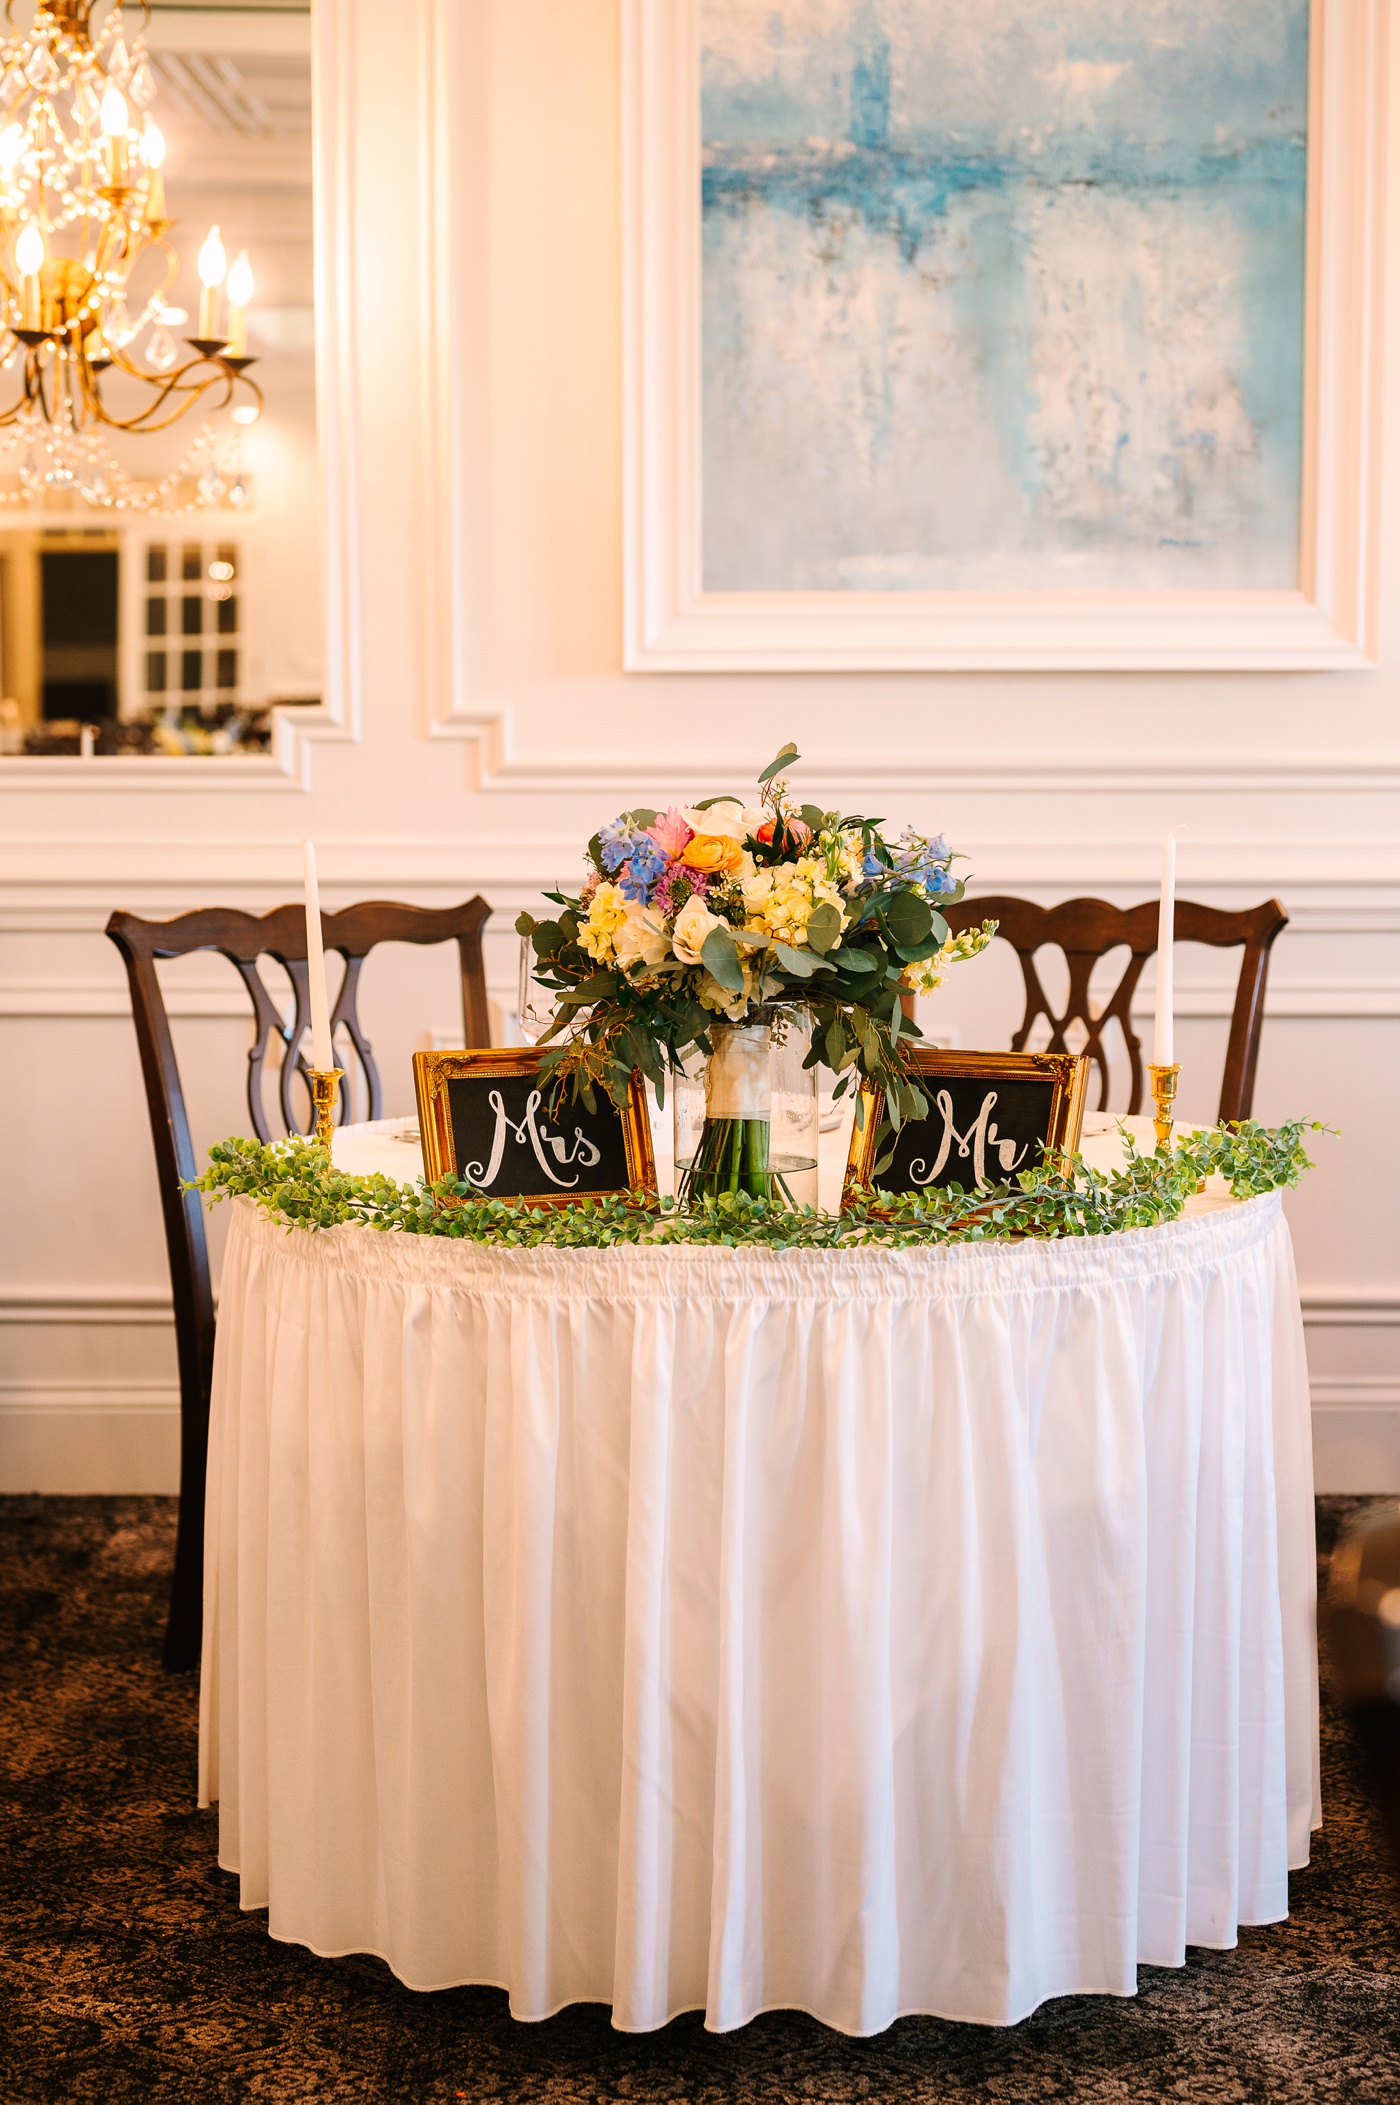 Sweetheart table with gold candlesticks and greenery